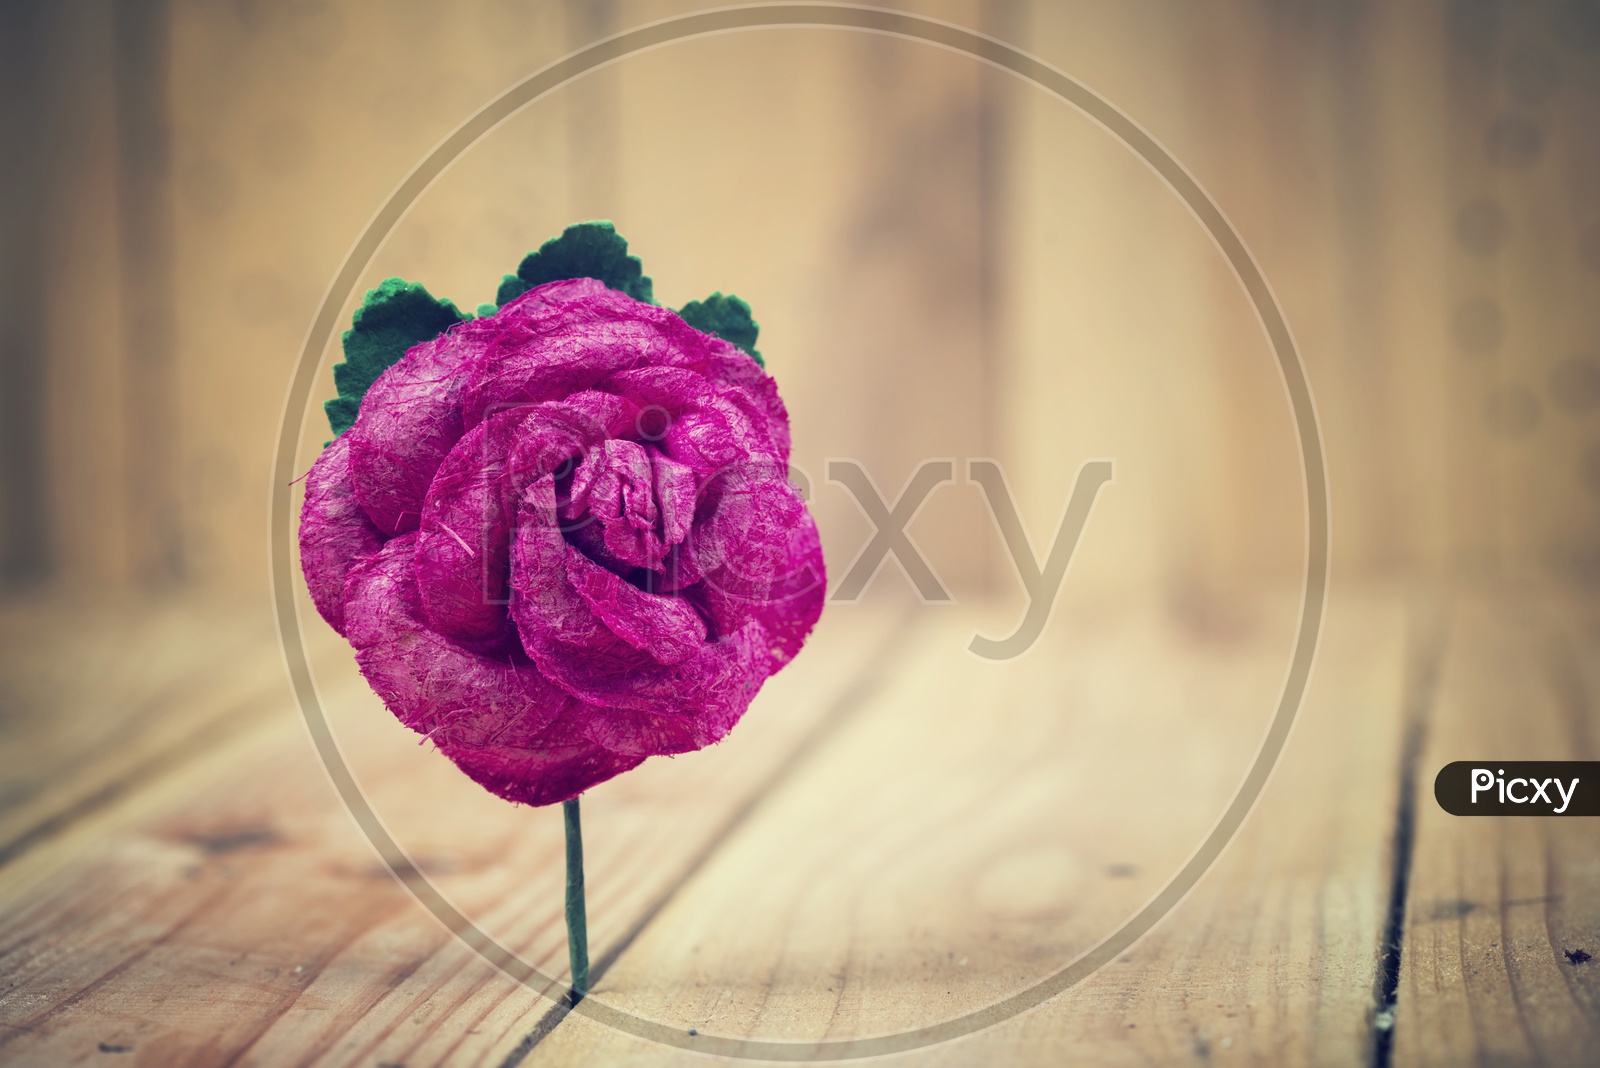 vintage rose flower Alone Over Wooden Background With Selective Focus